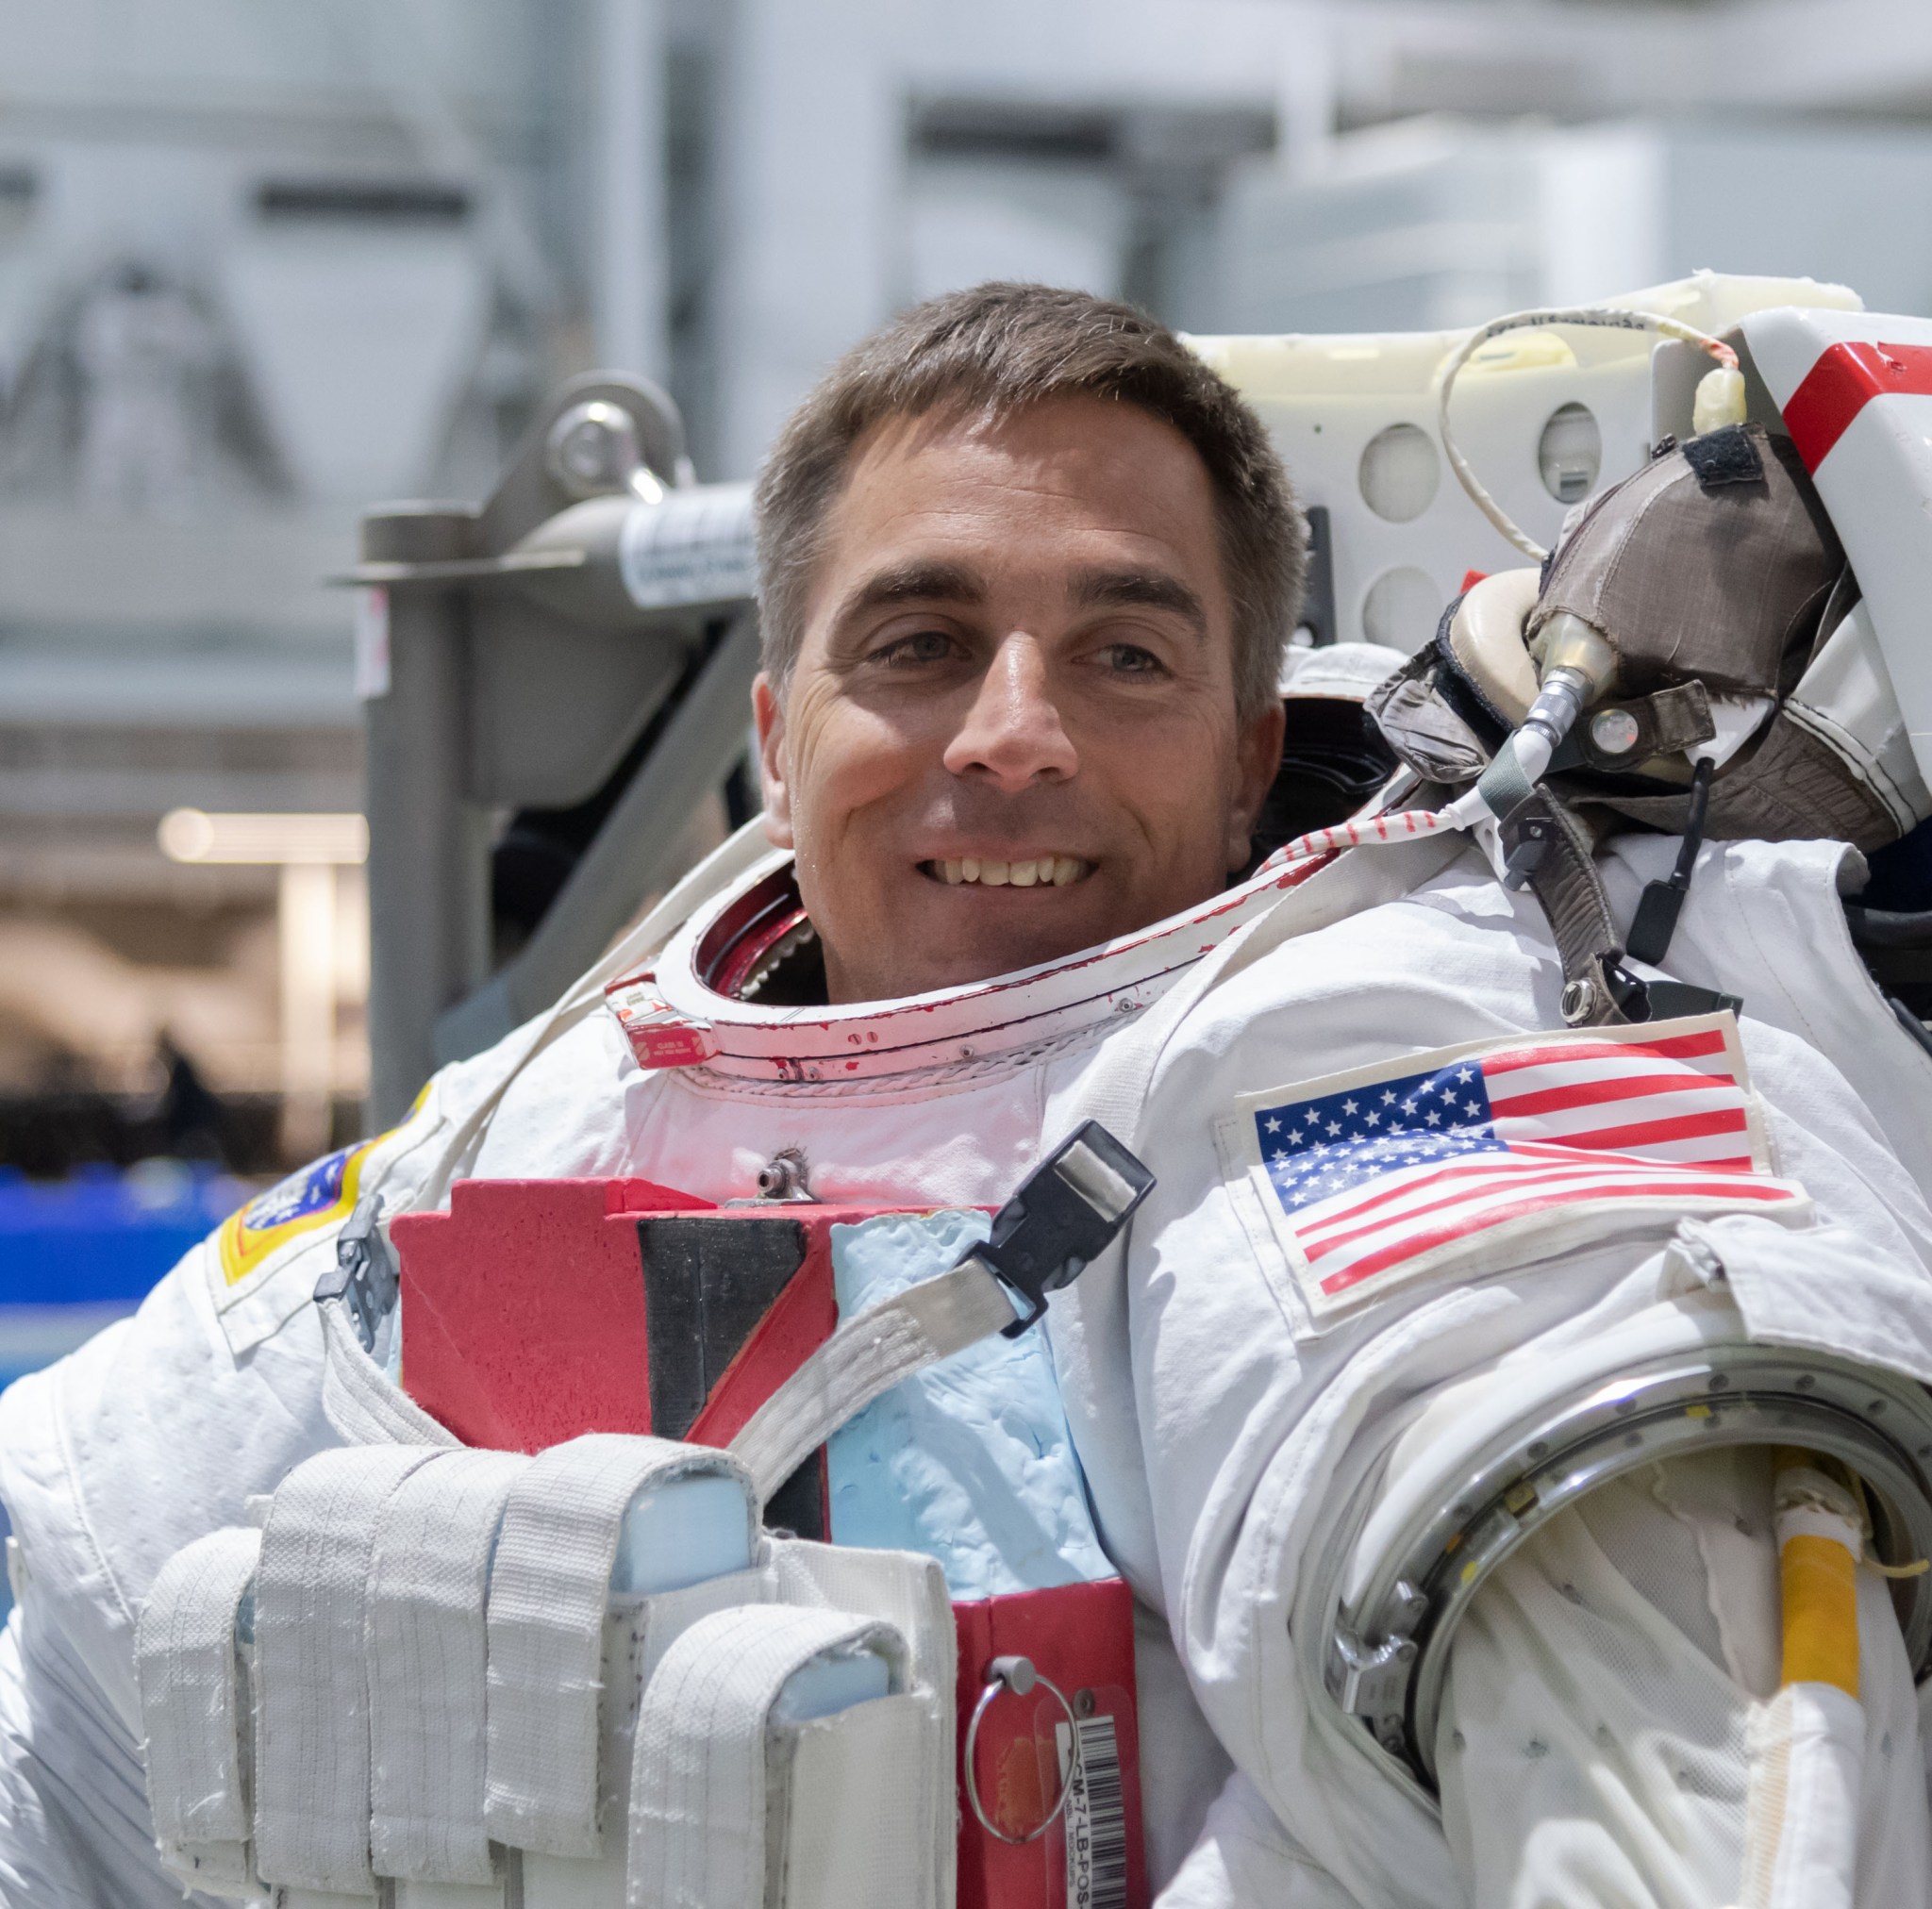 NASA astronaut Chris Cassidy prepares for a spacewalk simulation in the Neutral Buoyancy Lab at NASA’s Johnson Space Center